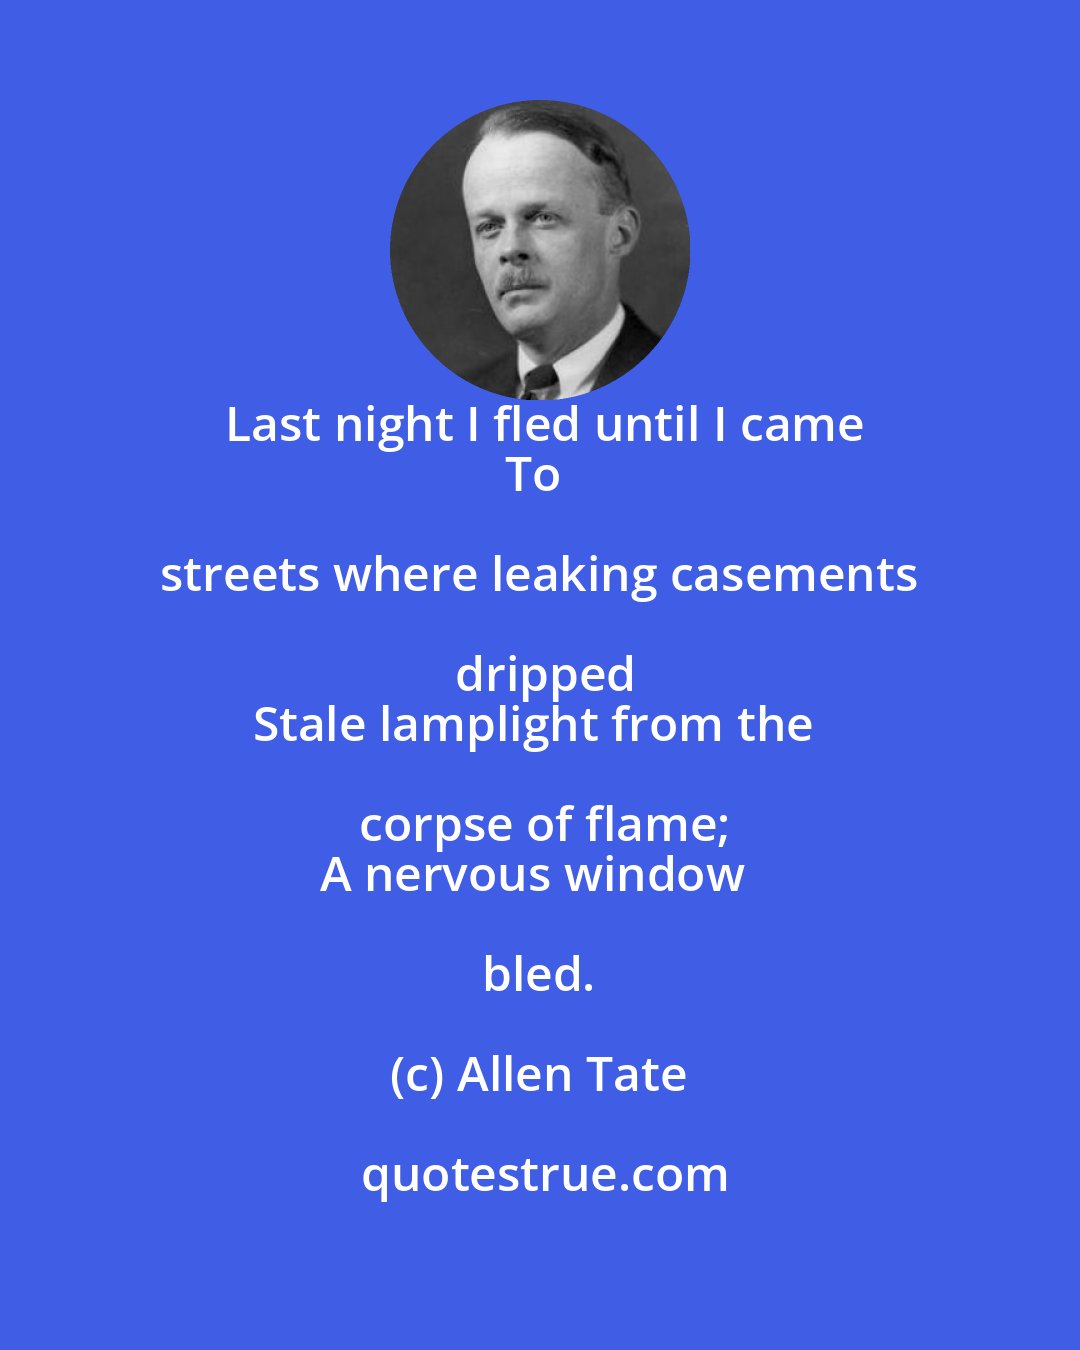 Allen Tate: Last night I fled until I came
To streets where leaking casements dripped
Stale lamplight from the corpse of flame;
A nervous window bled.